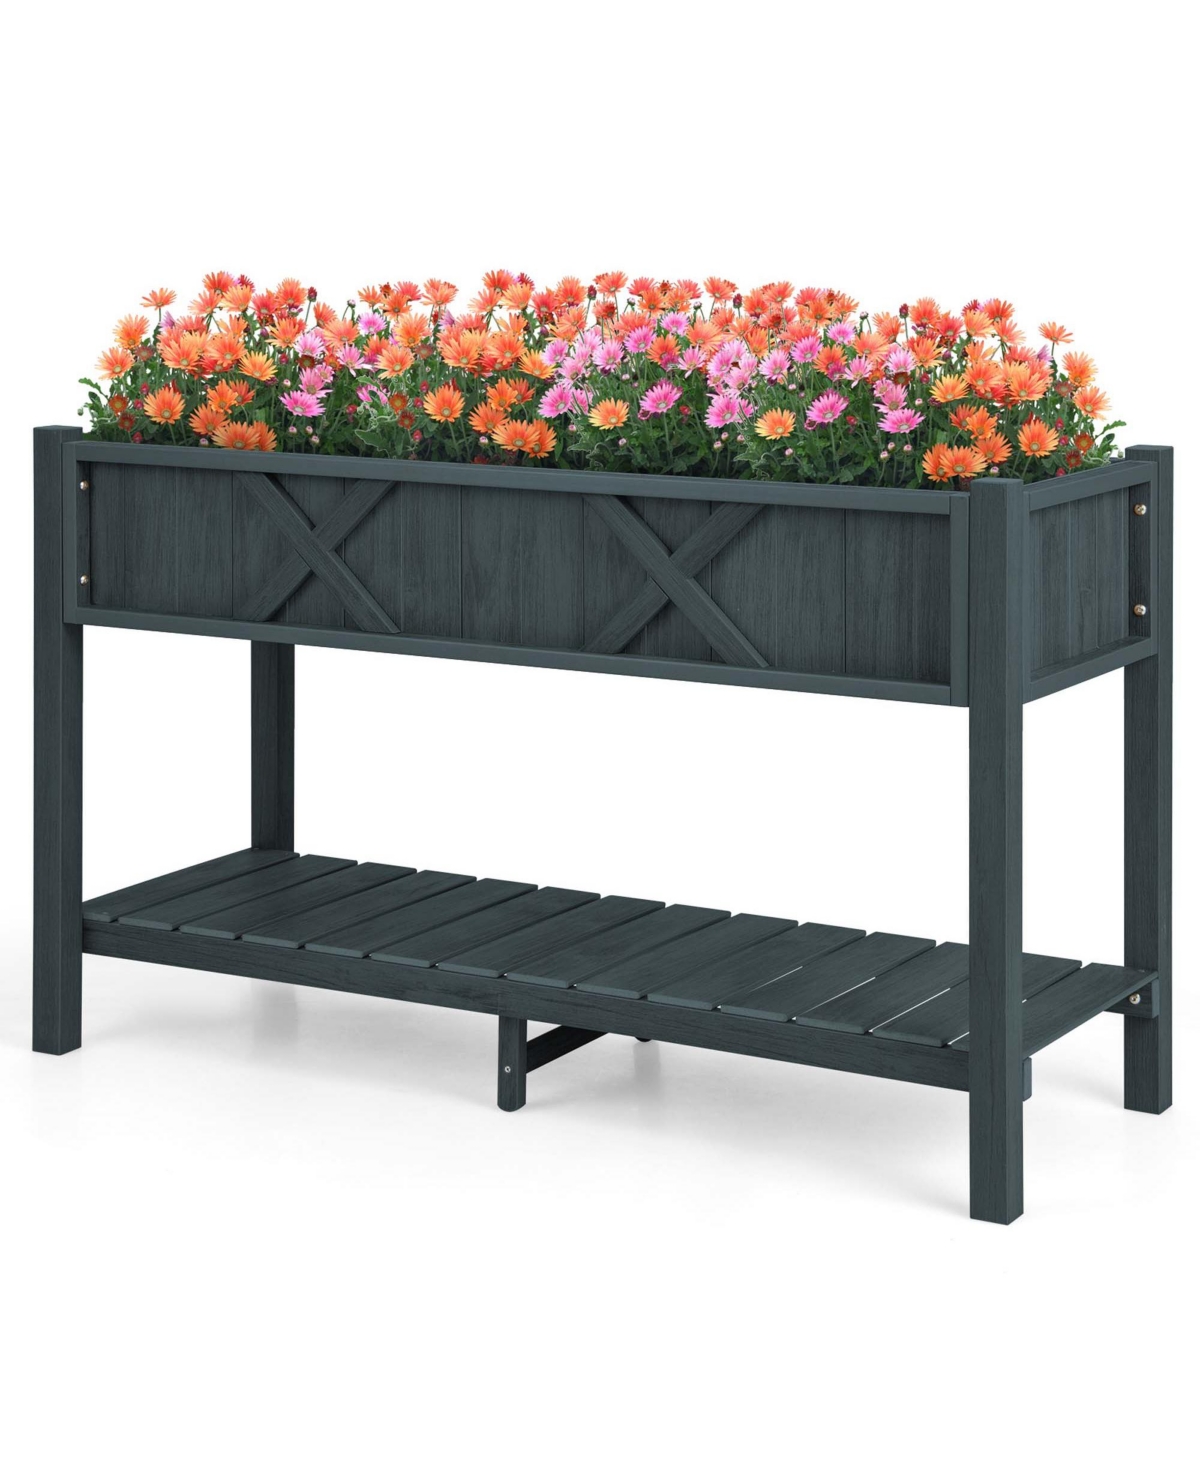 Hips Raised Garden Bed Poly Wood Elevated Planter Box with Legs, Storage Shelf - Black